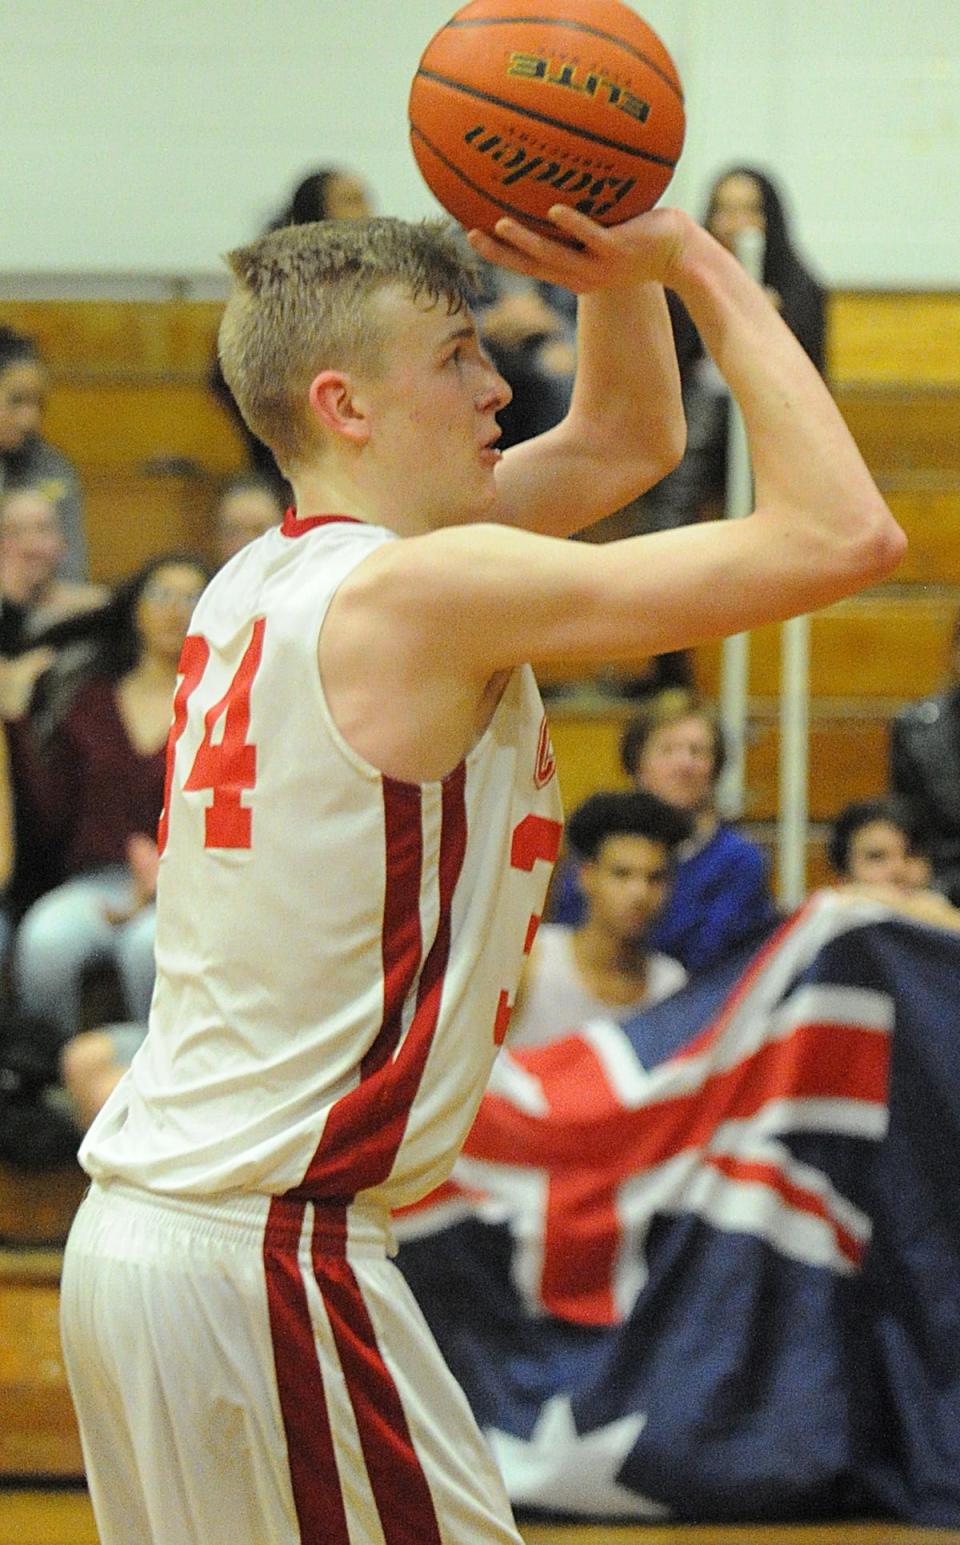 In this file photo, Bishop Connolly's Cooper Creek shoots a free throw during a game against Westport, with his fan club holding the Australian flag in the bleachers.